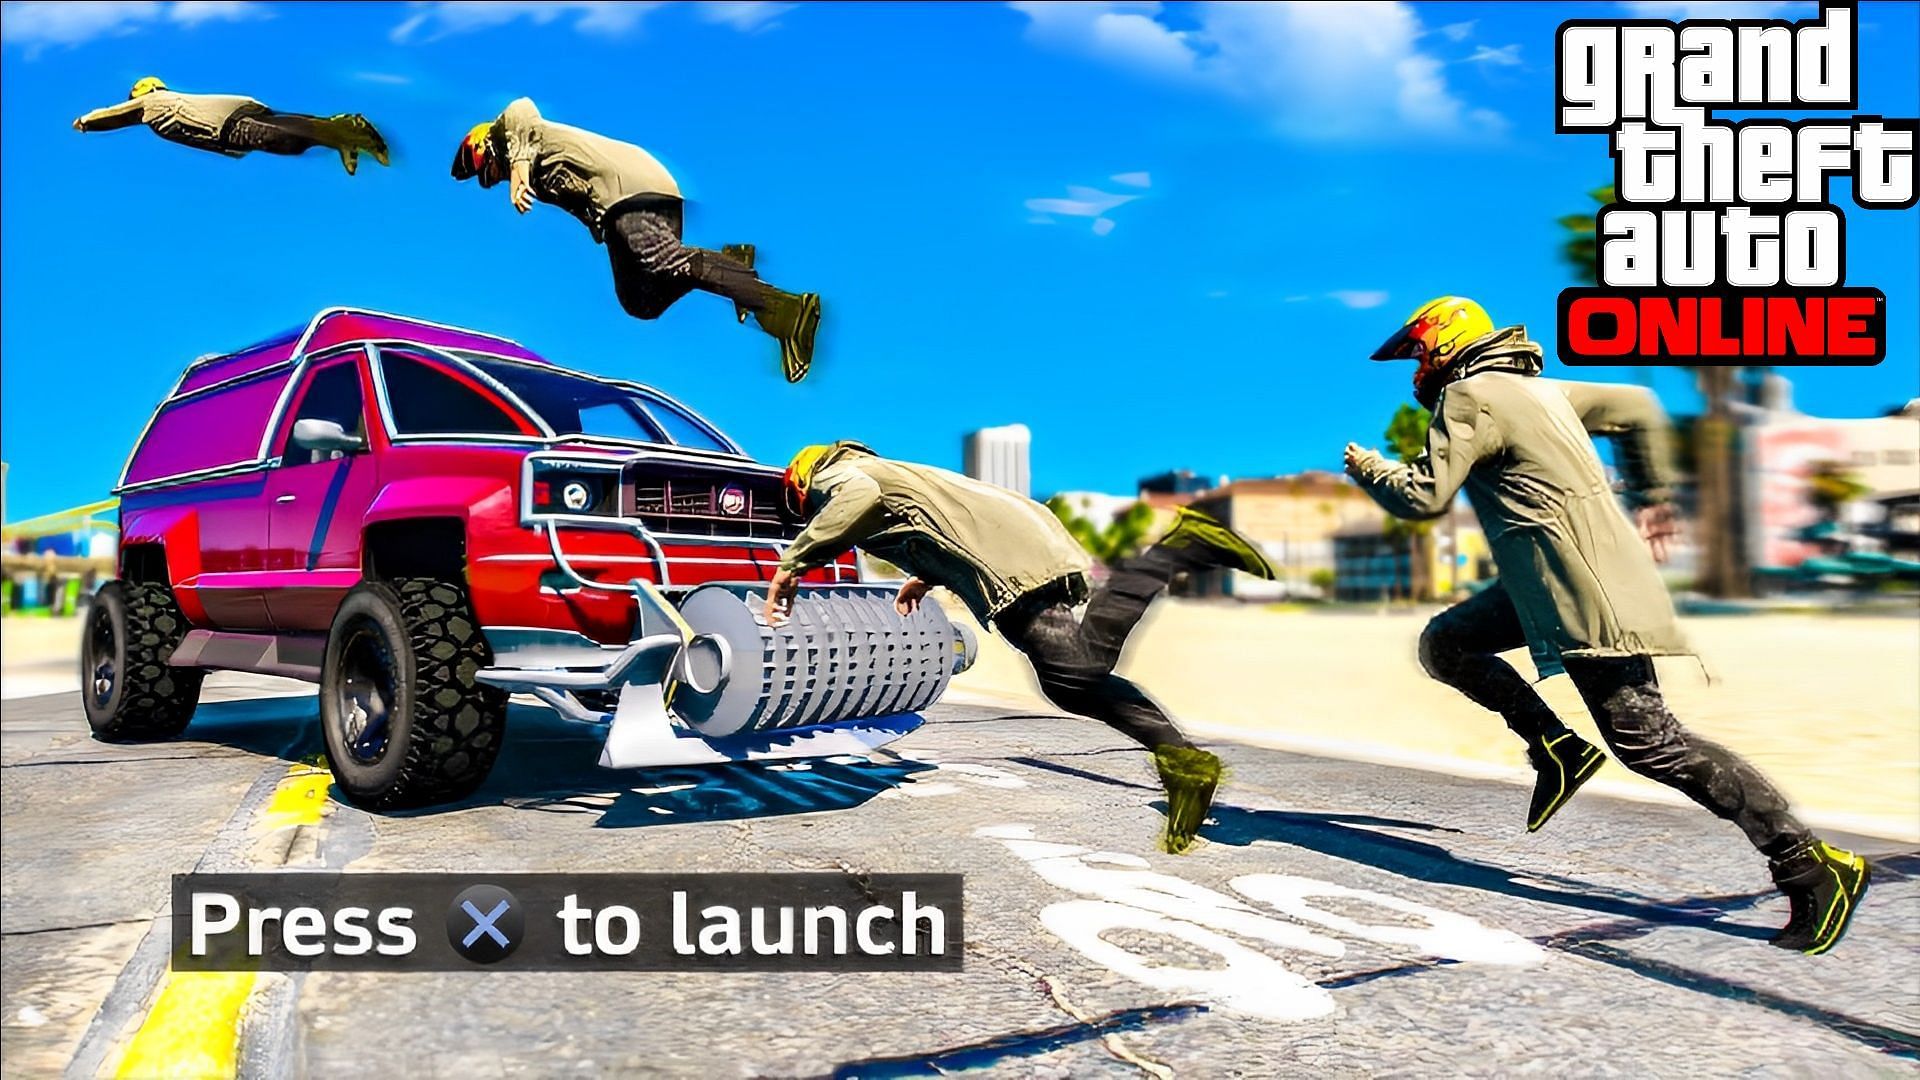 Launch glitches can always be quite funny to try before they get patched by Rockstar Games. (Image via YouTube/Hazardous)